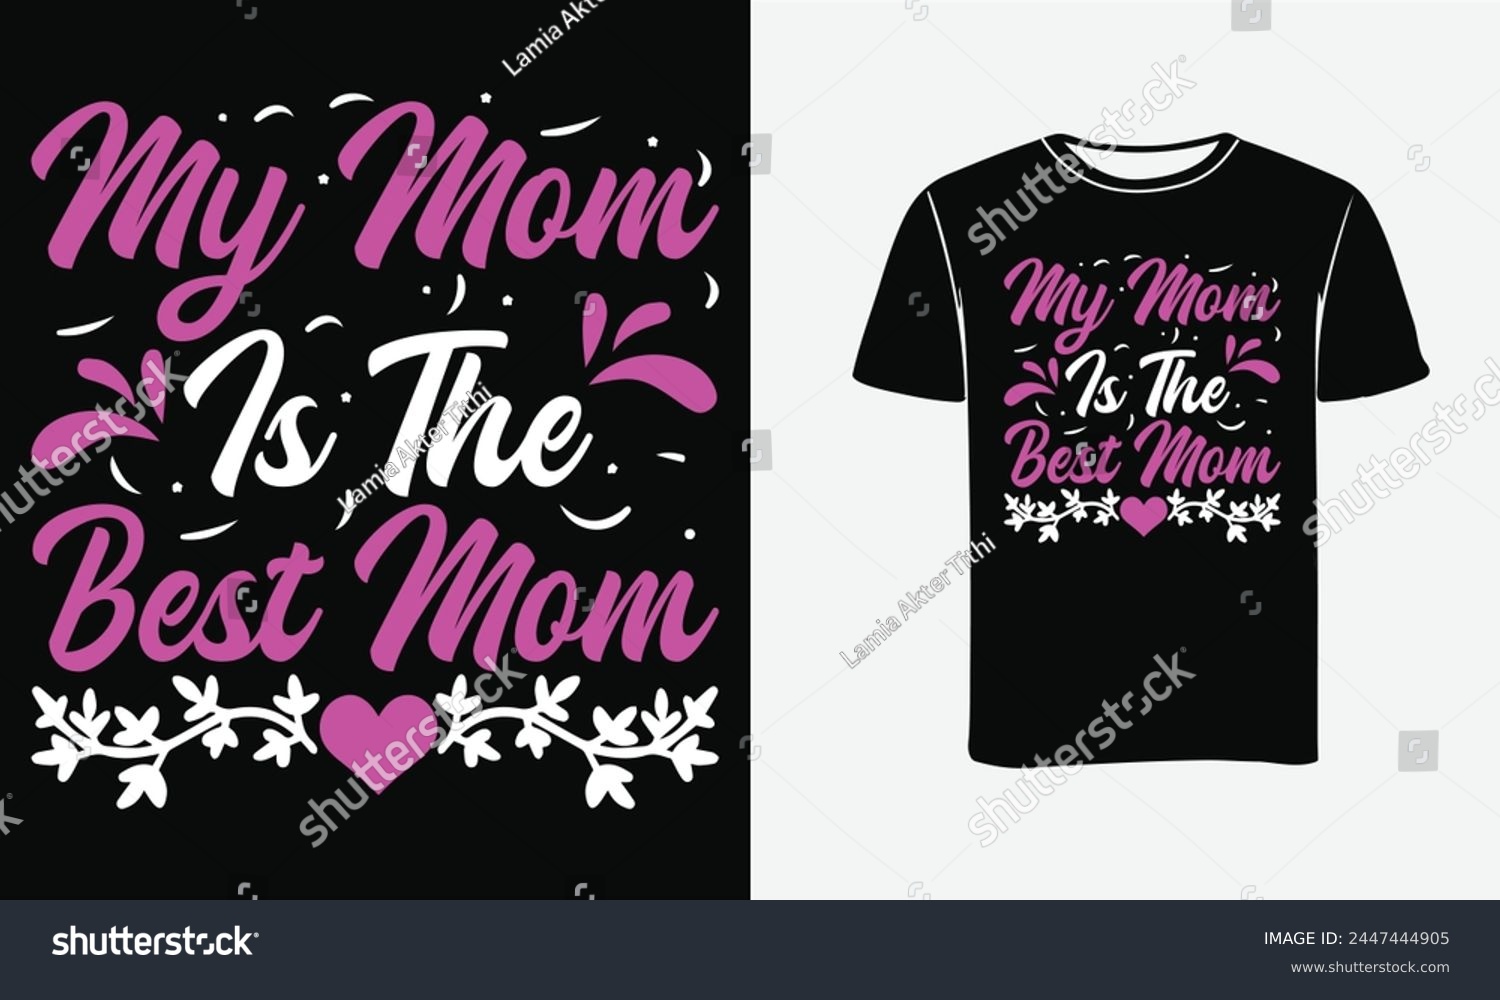 SVG of My Mom Is The Best  . Mother's day shirt print template, typography design for mom mommy mama daughter grandma girl women aunt mom life child best mom adorable shirt .  svg